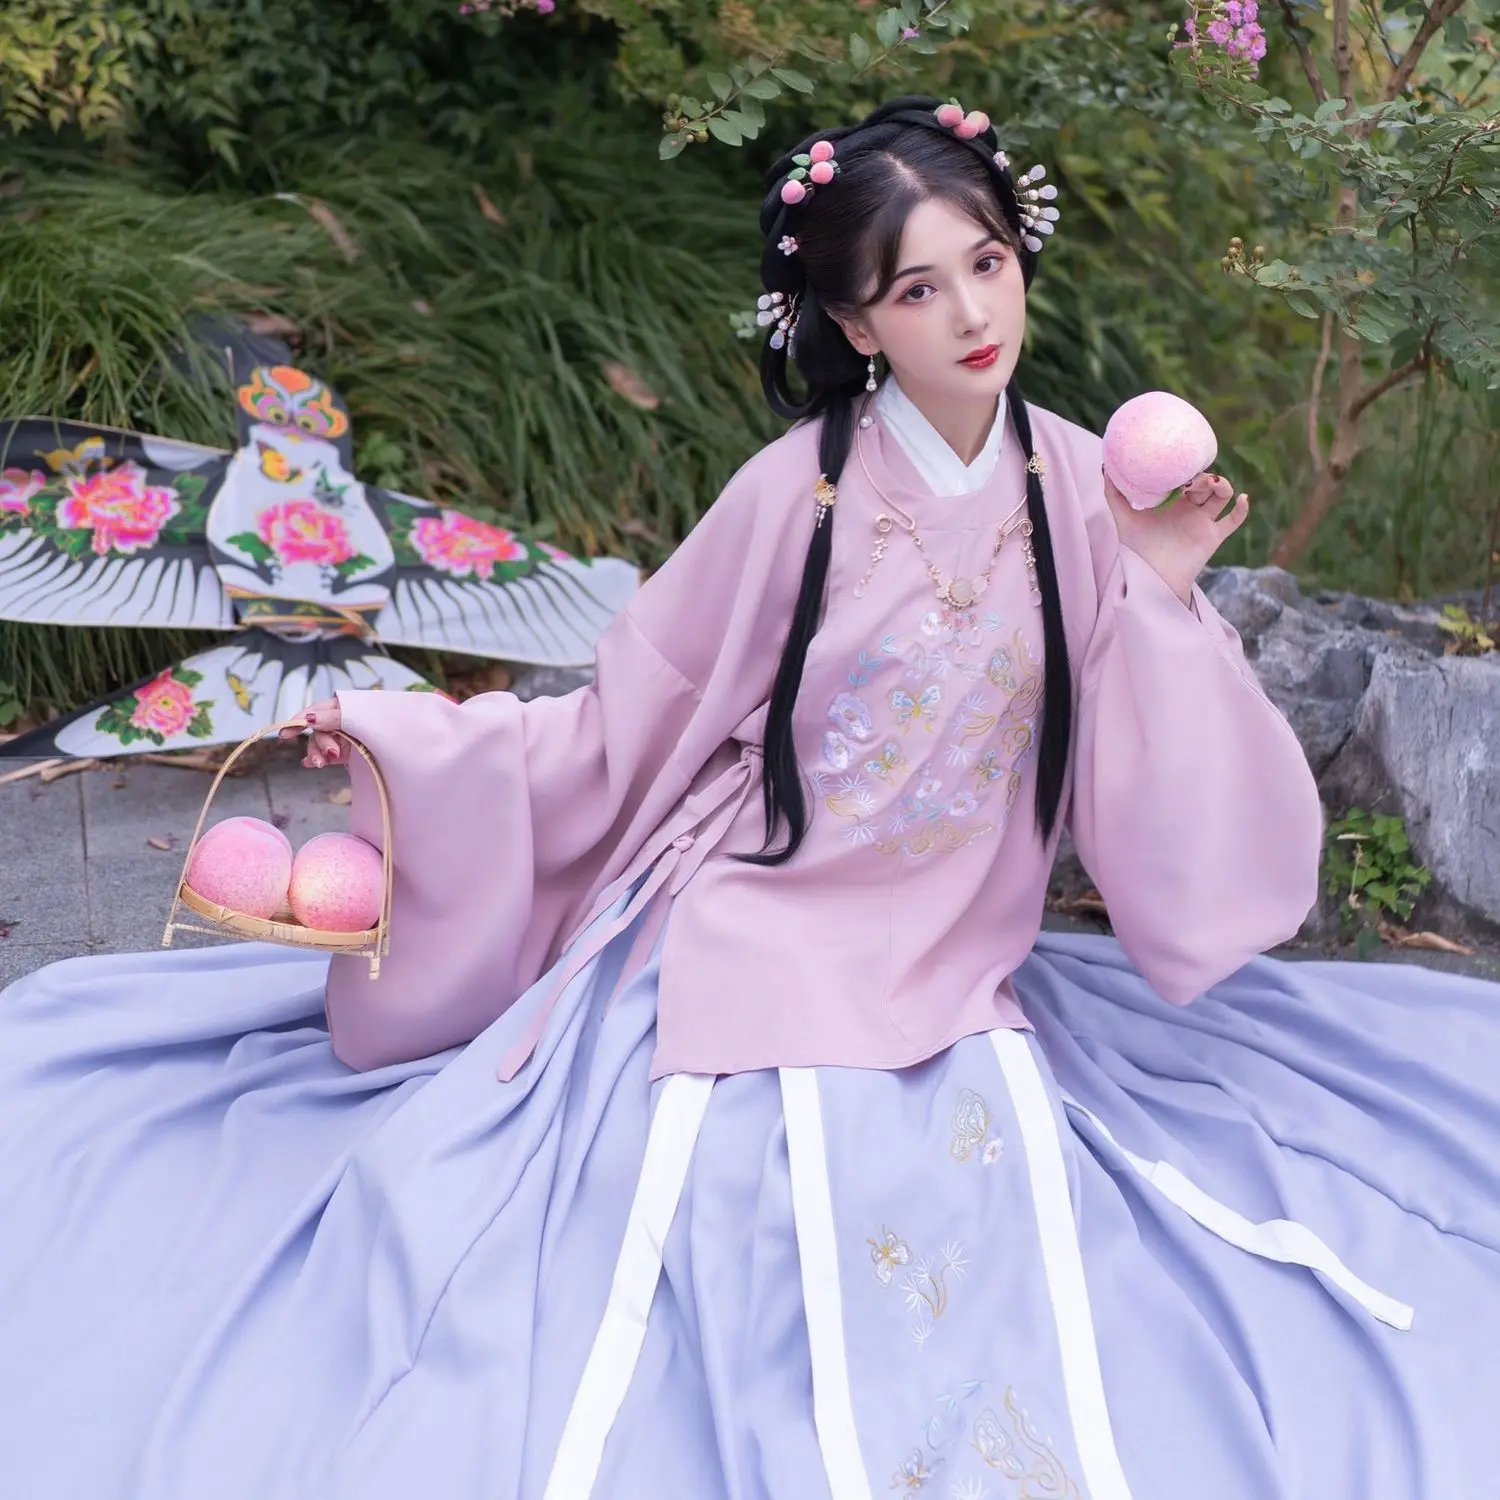 Female Hanfu Dress Suit Embroidery Flower Novelty Fairy Cosplay Costume Round Neck Ming Dynasty Pink Performance Clothing